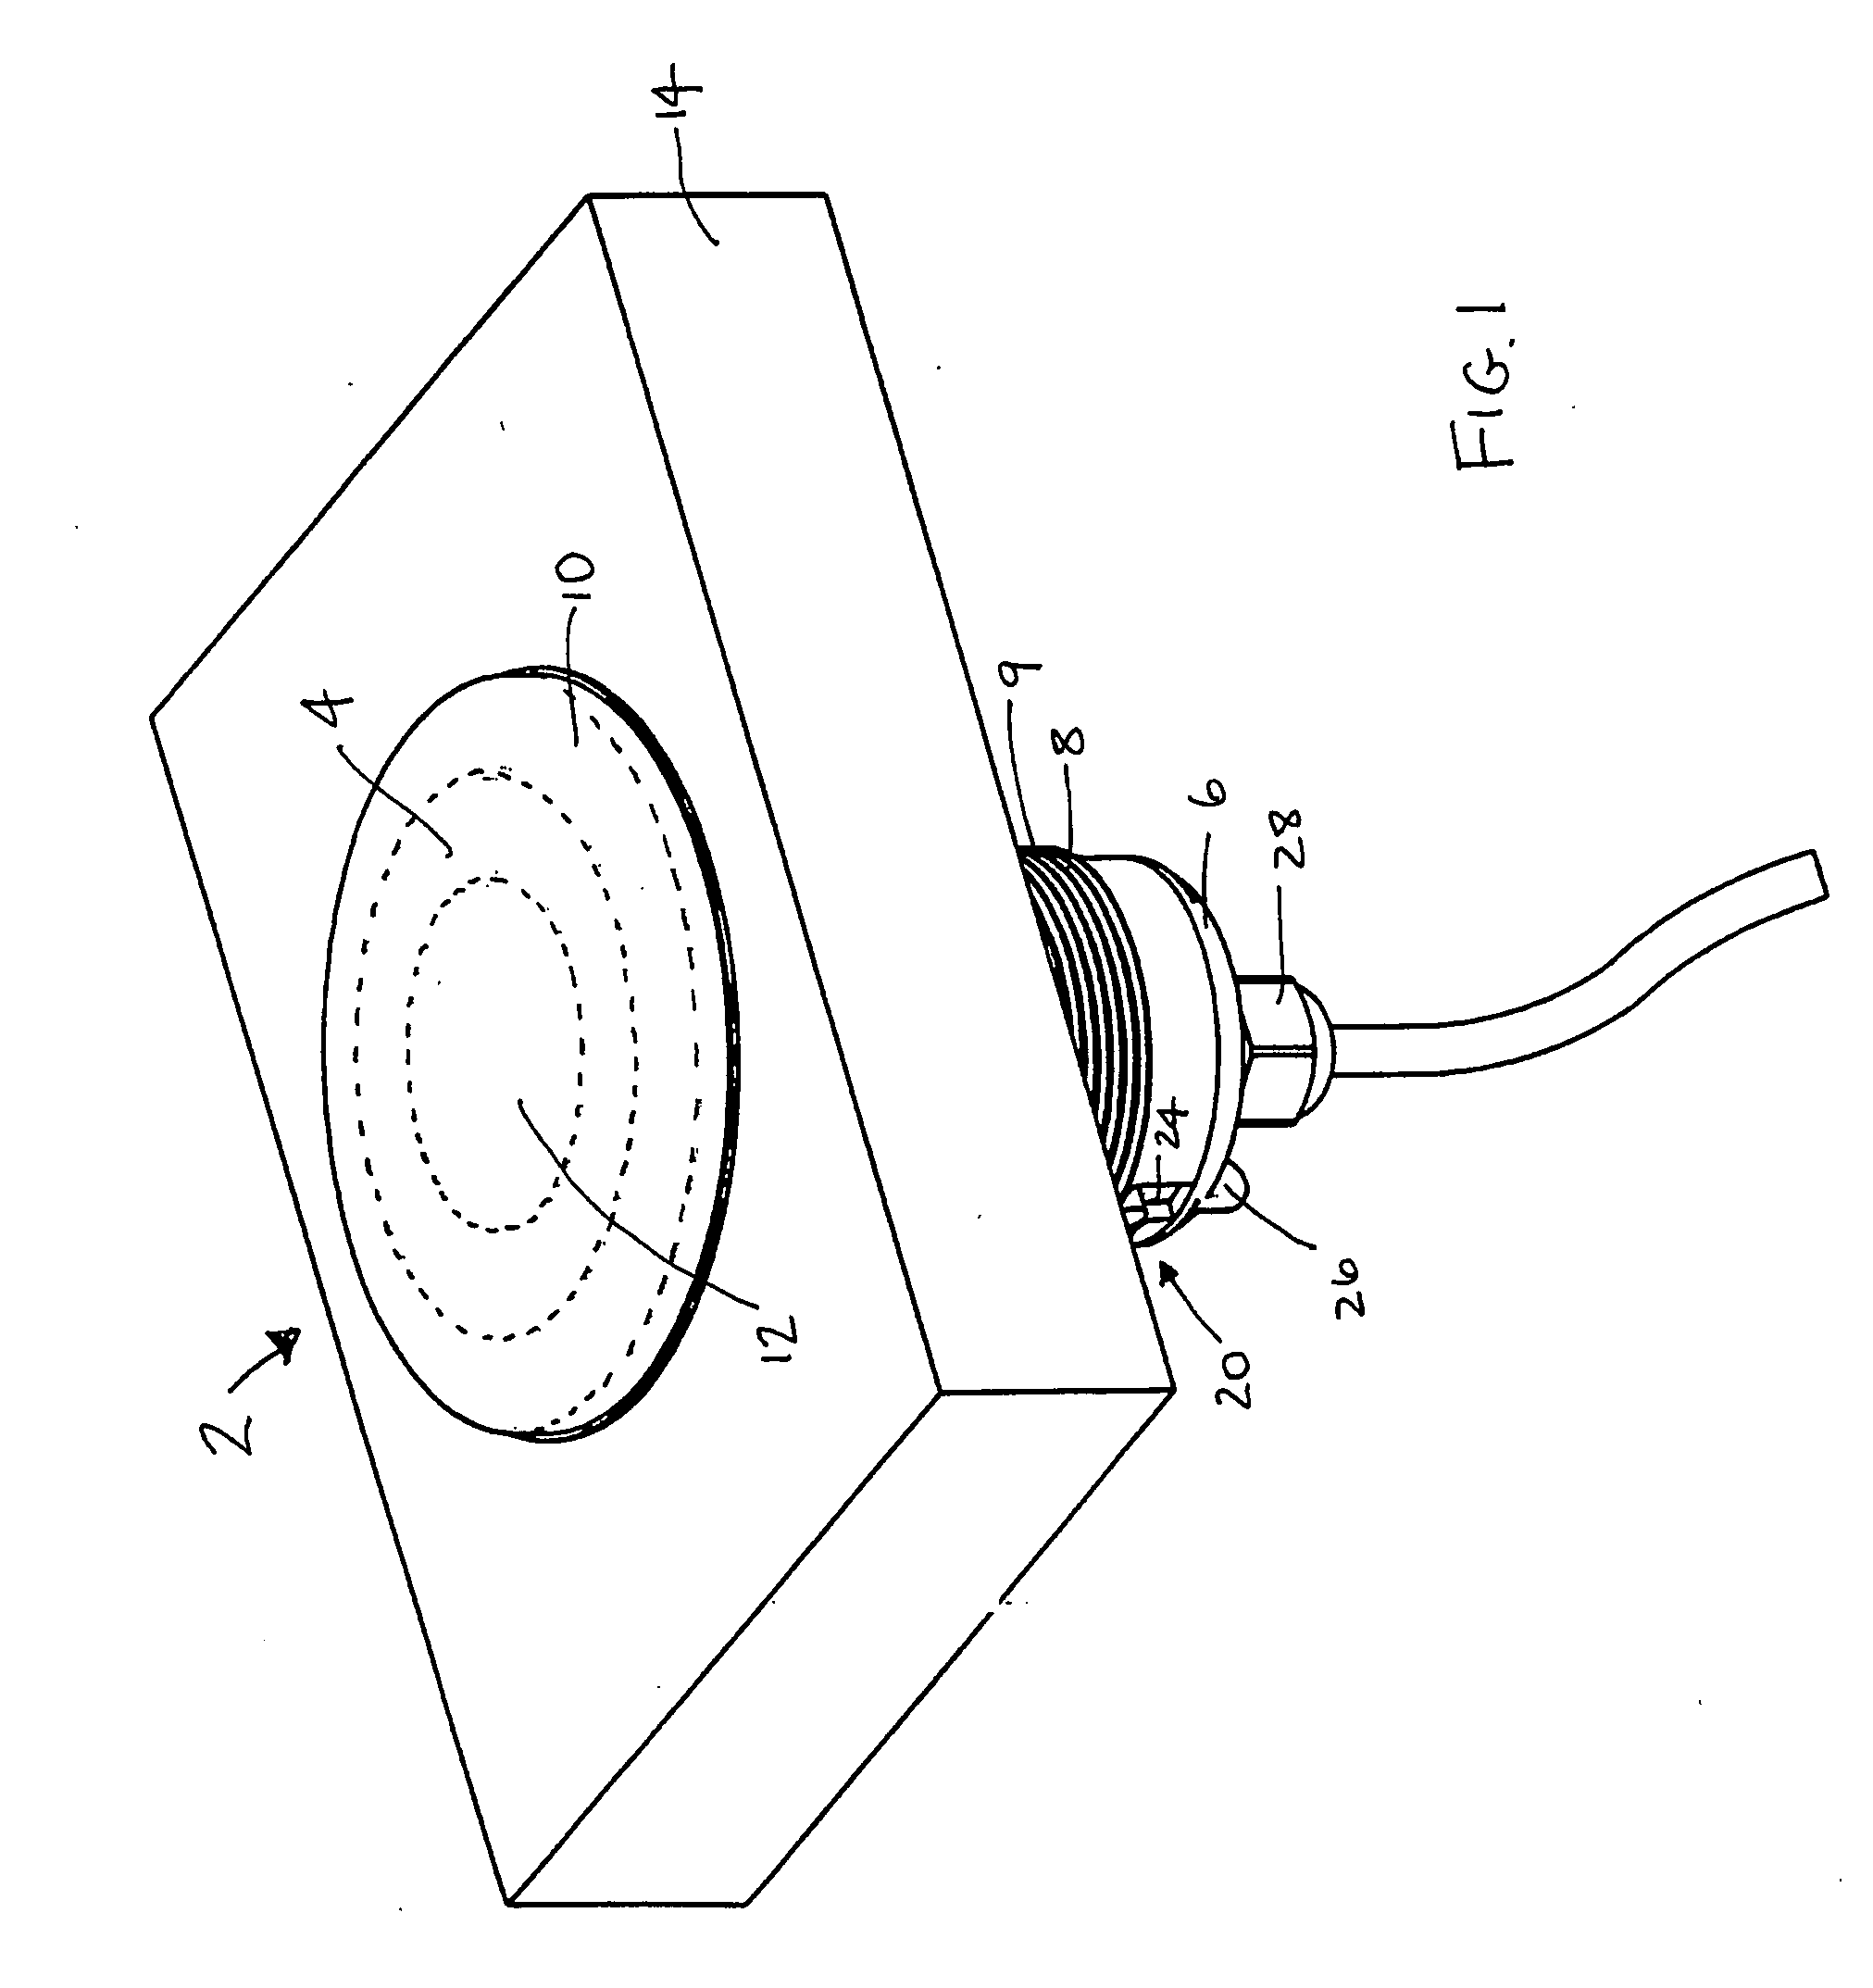 Led Lighting Apparatus in a Plastic Housing